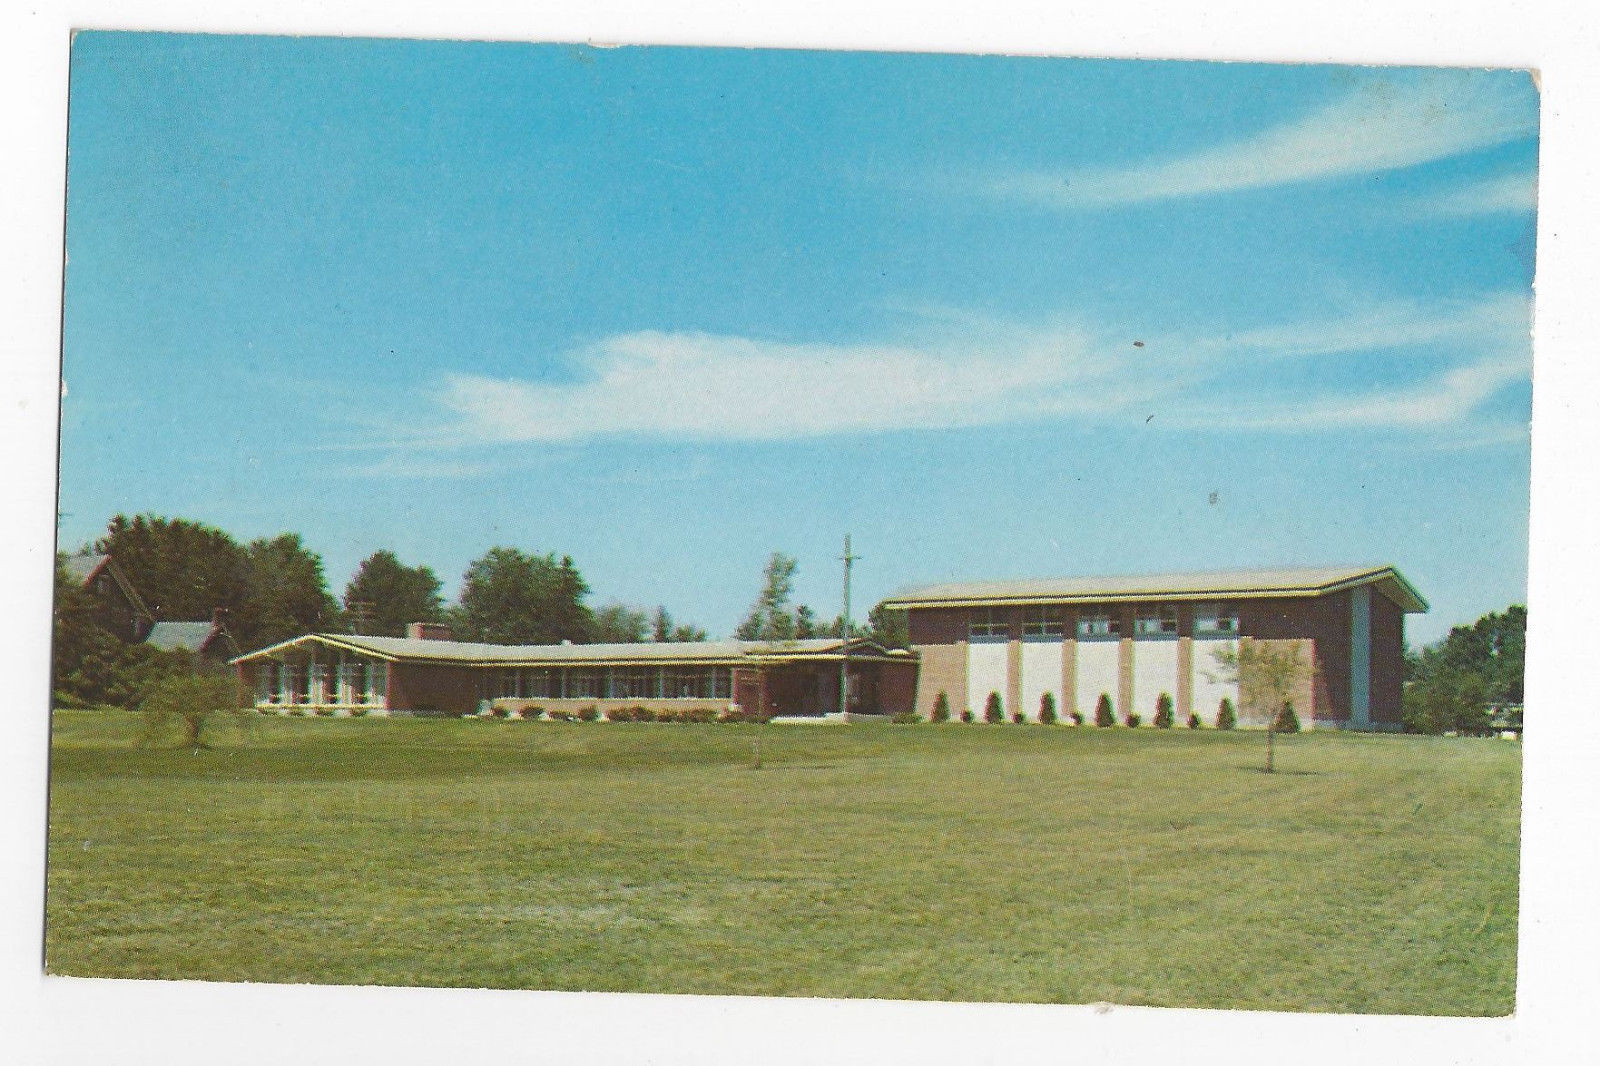 NY Schenectady Dominican Retreat House for Women Vintage Postcard - $4.99